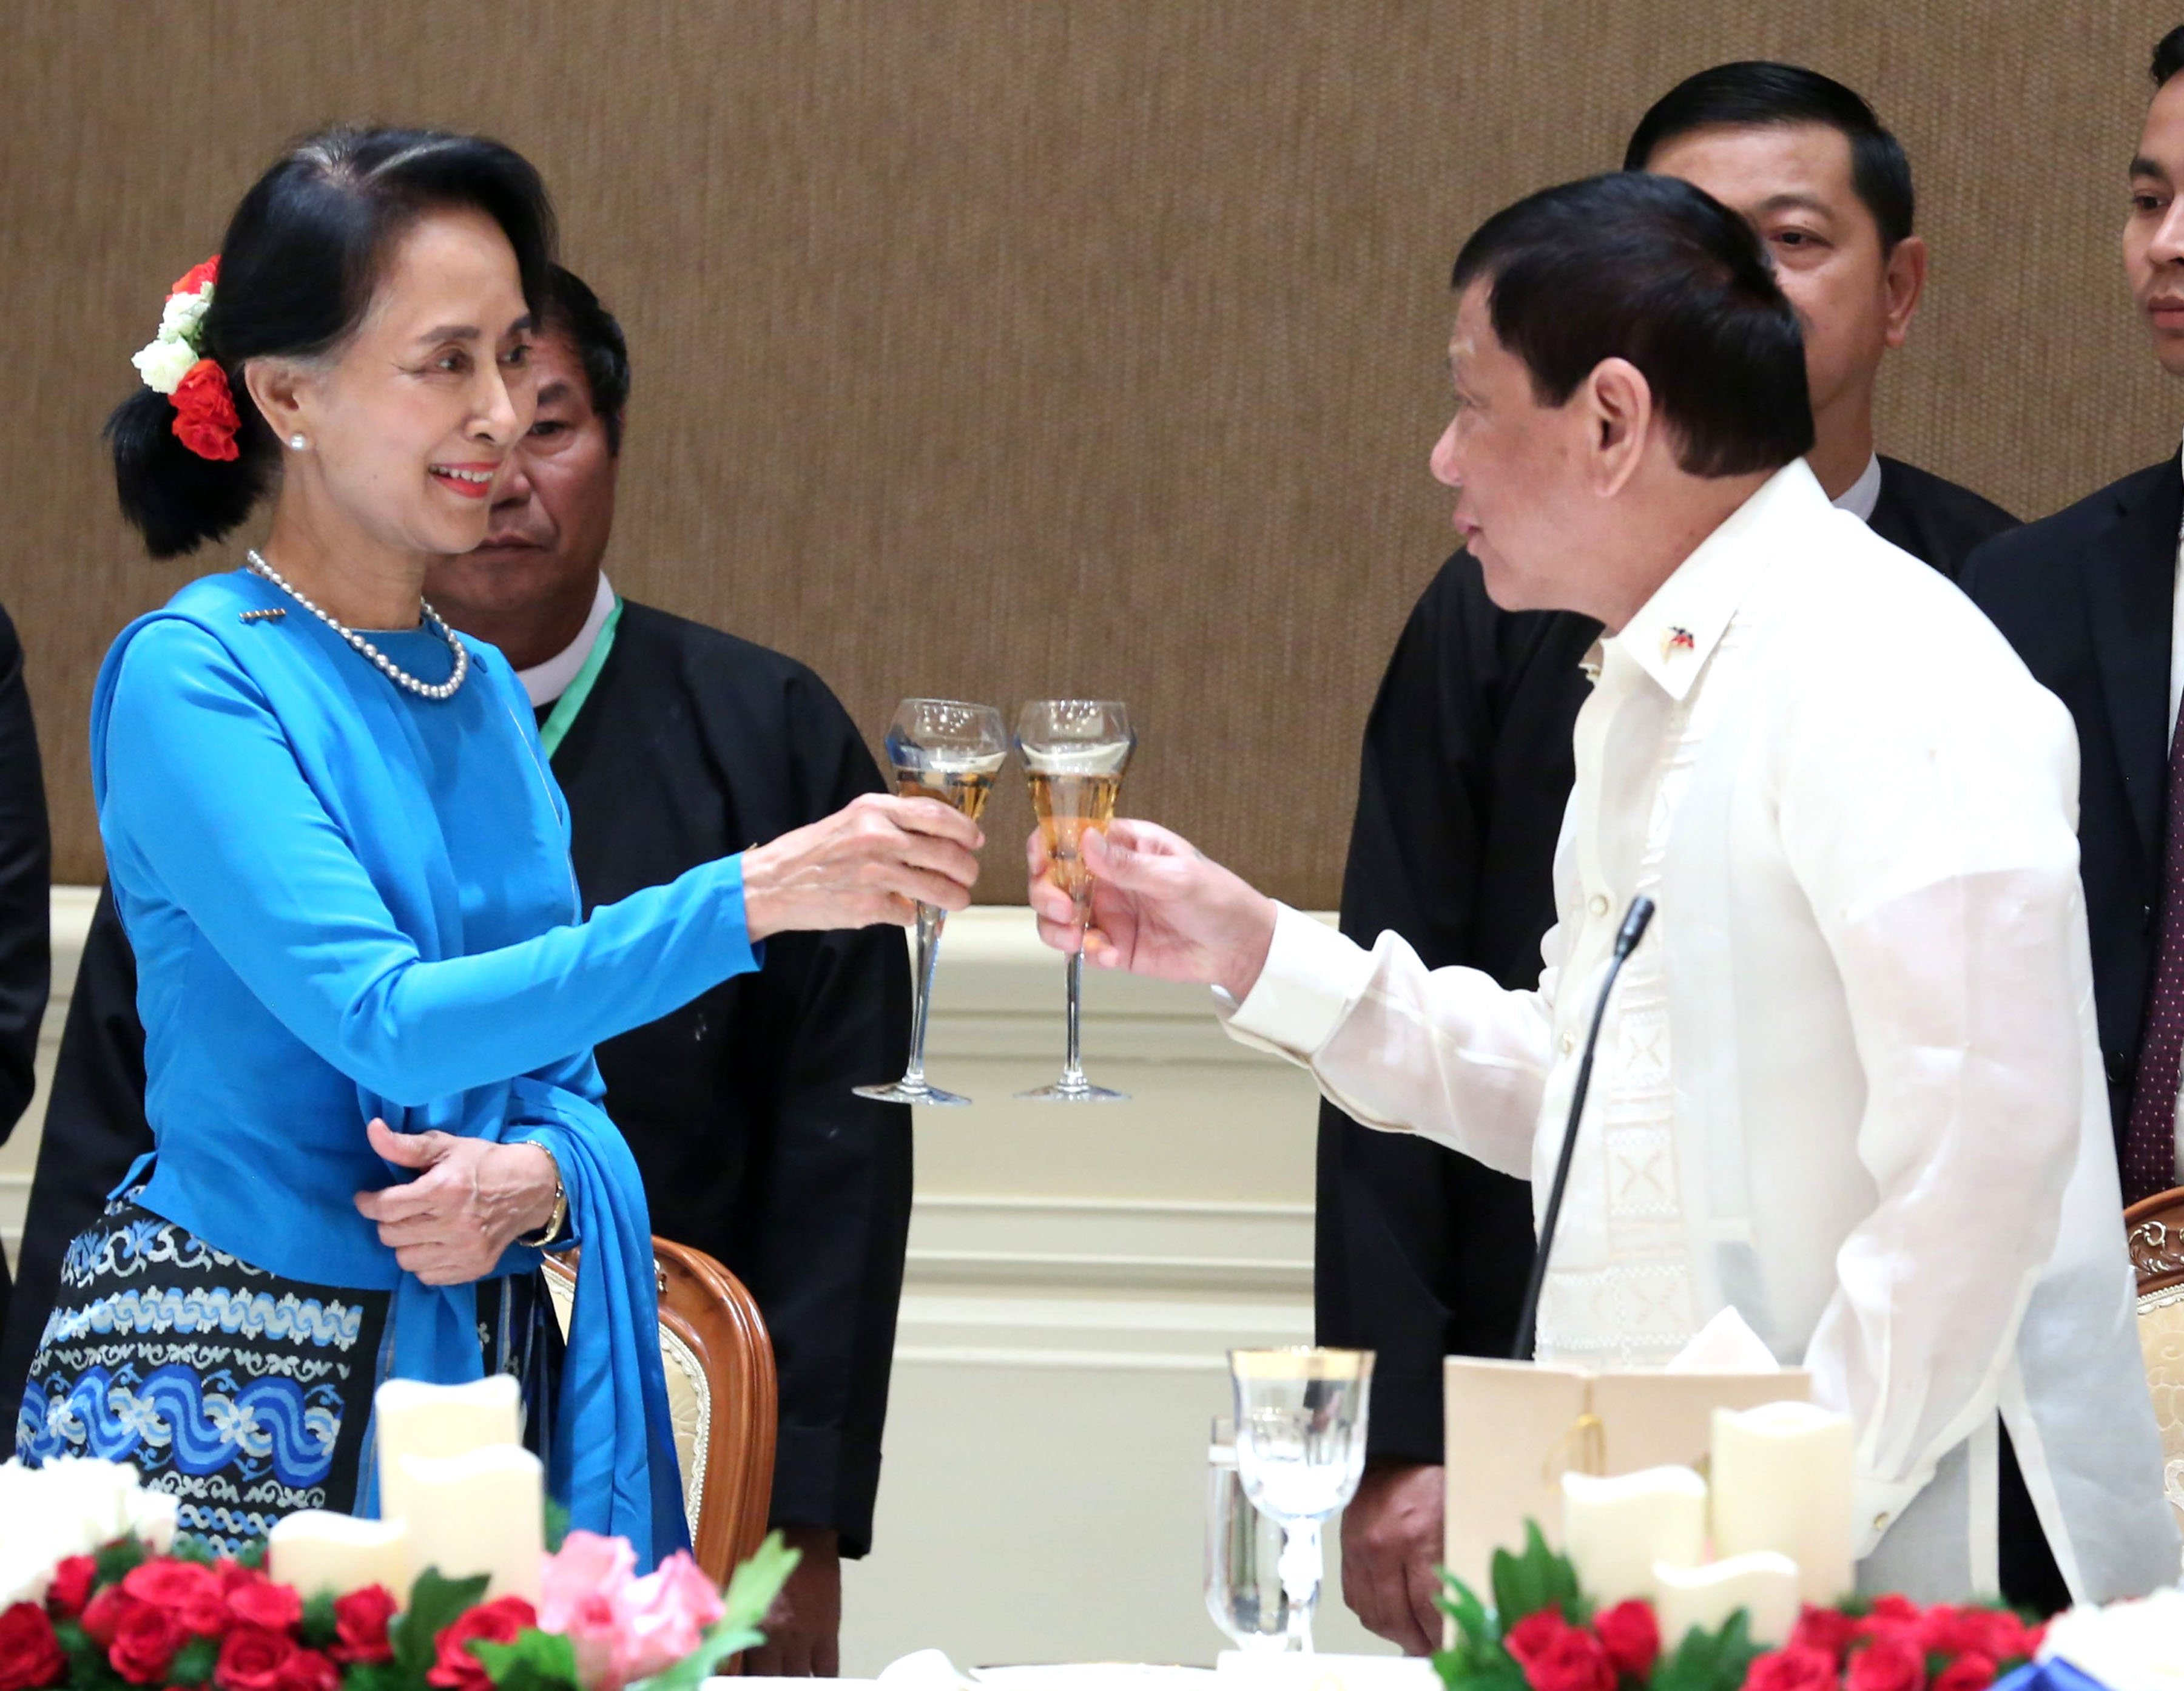 PRRD and Myanmar Minister for Foreign Affairs Aung San Suu Kyi toast during the State Banquet